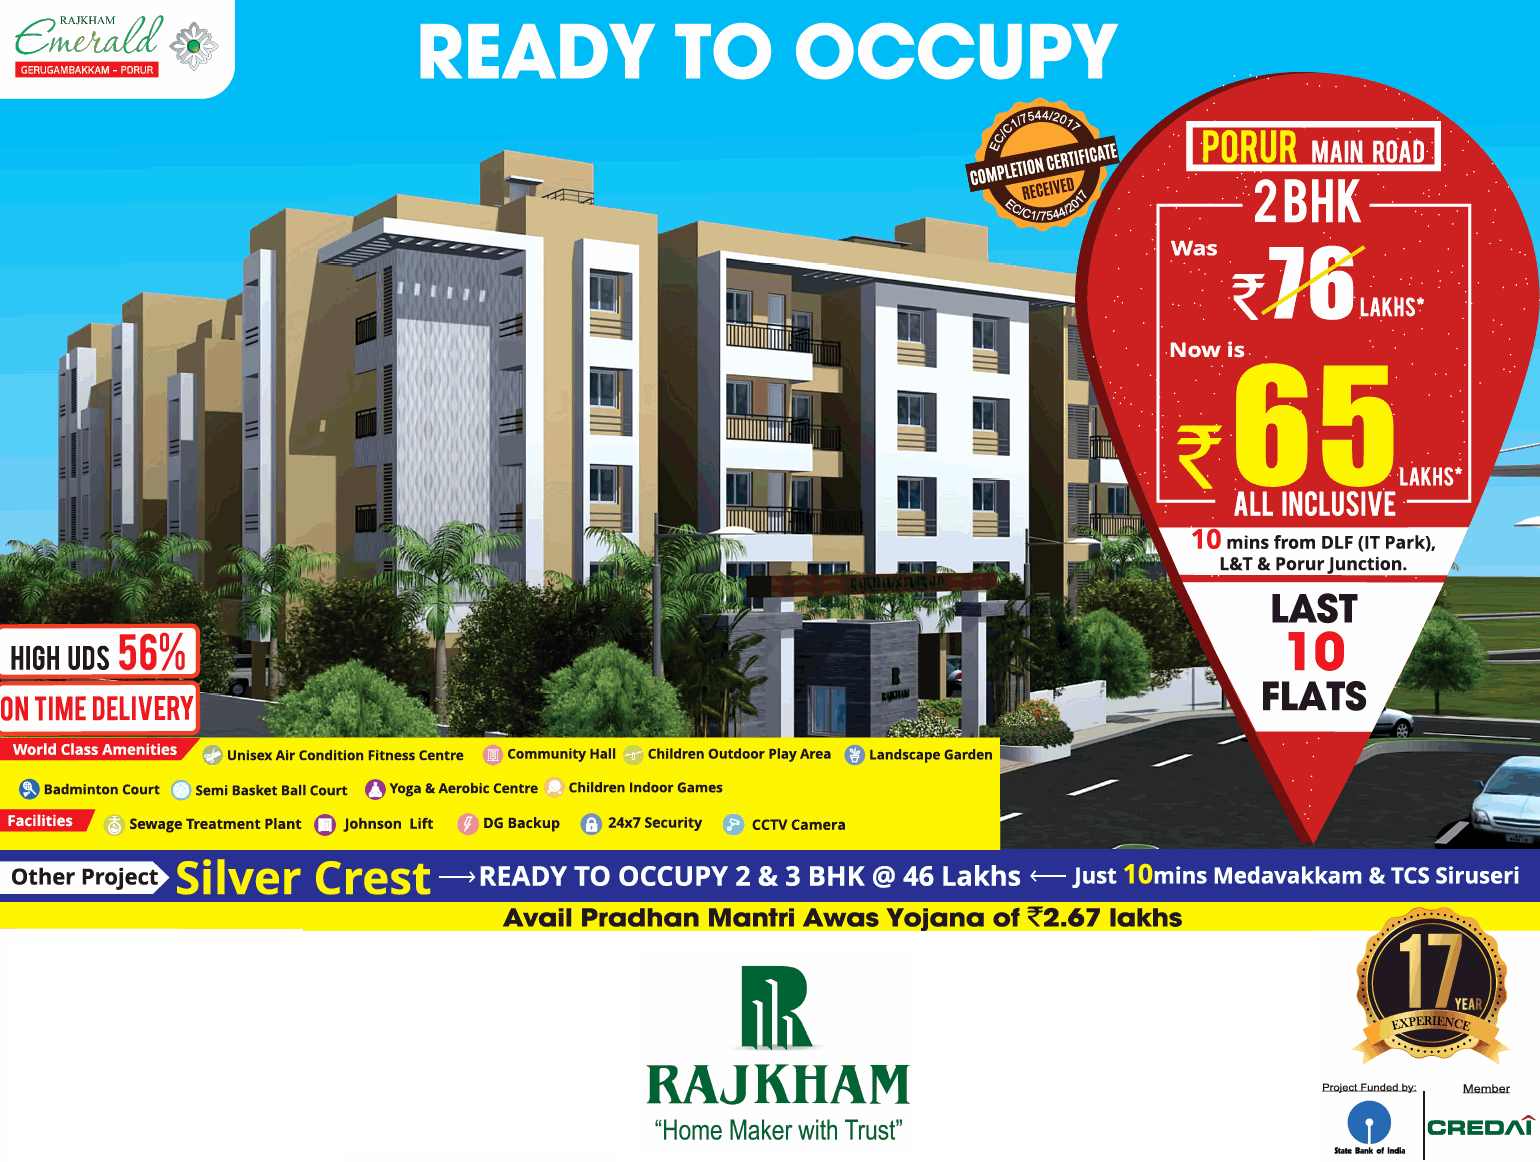 Book ready to occupy 2 BHK @ Rs 65 lakhs at Rajkham Emerald in Chennai Update